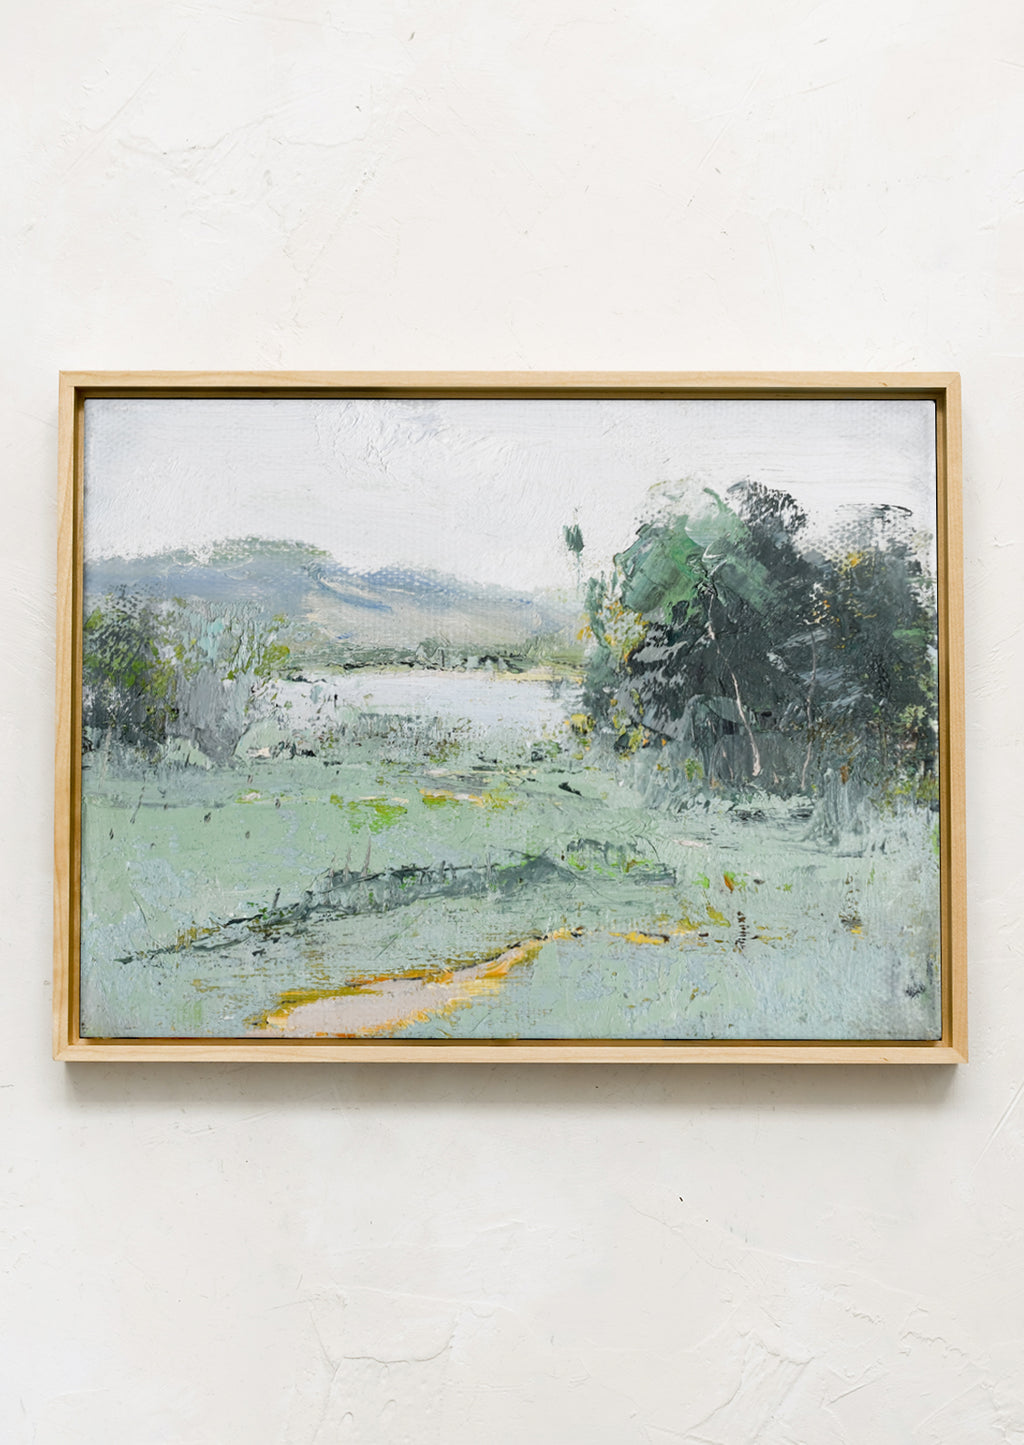 1: A framed original painting of a cool-colored lakeside landscape setting.